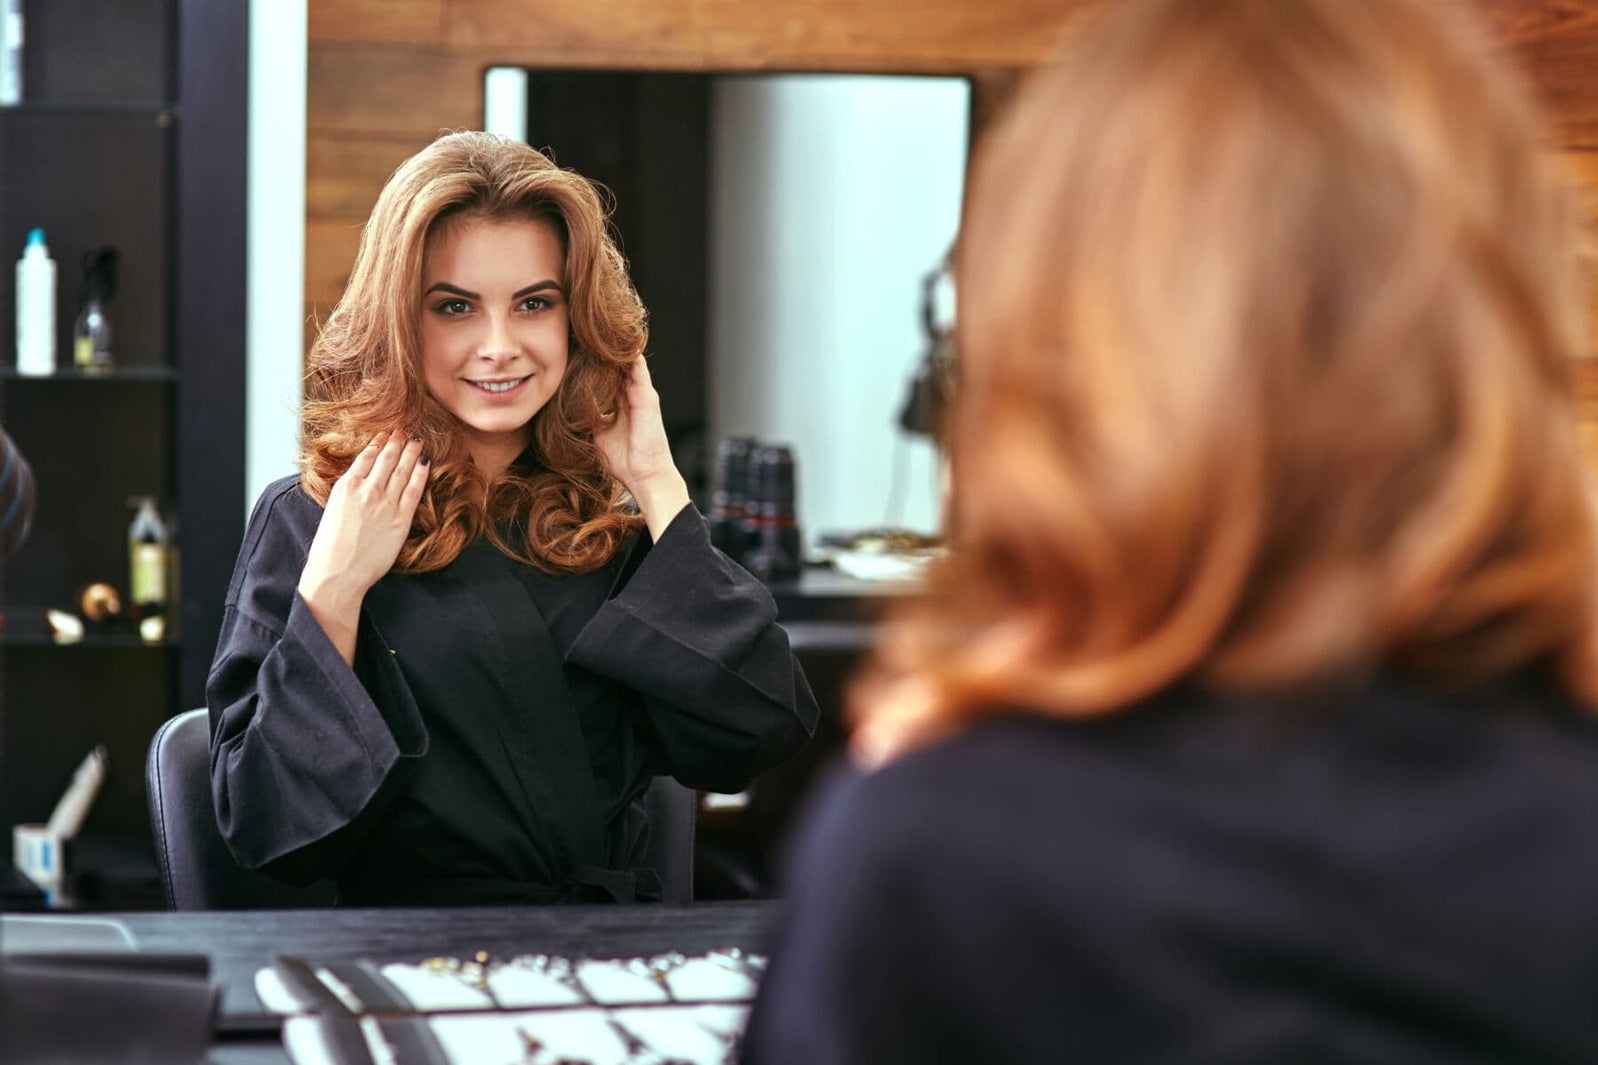 WHAT TO LOOK FOR IN PROFESSIONAL BEAUTY PRODUCTS